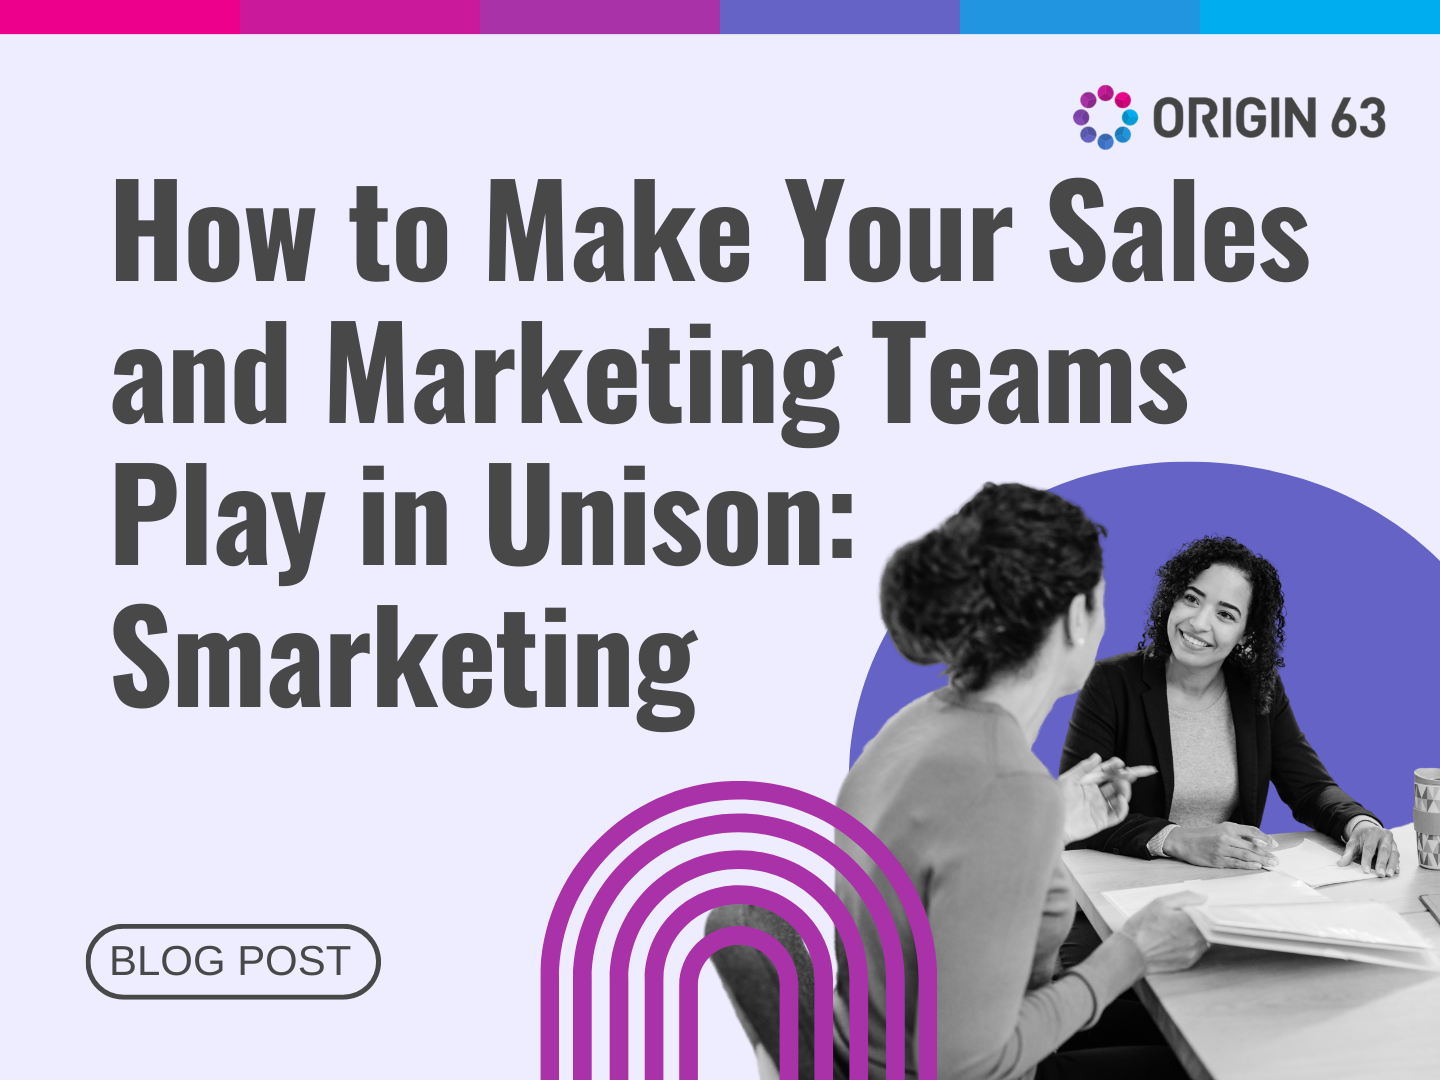 By implementing the 'Smarketing' strategy, you can hear clearly and loud the unison of your sales and marketing teams. In this post, we show you how.